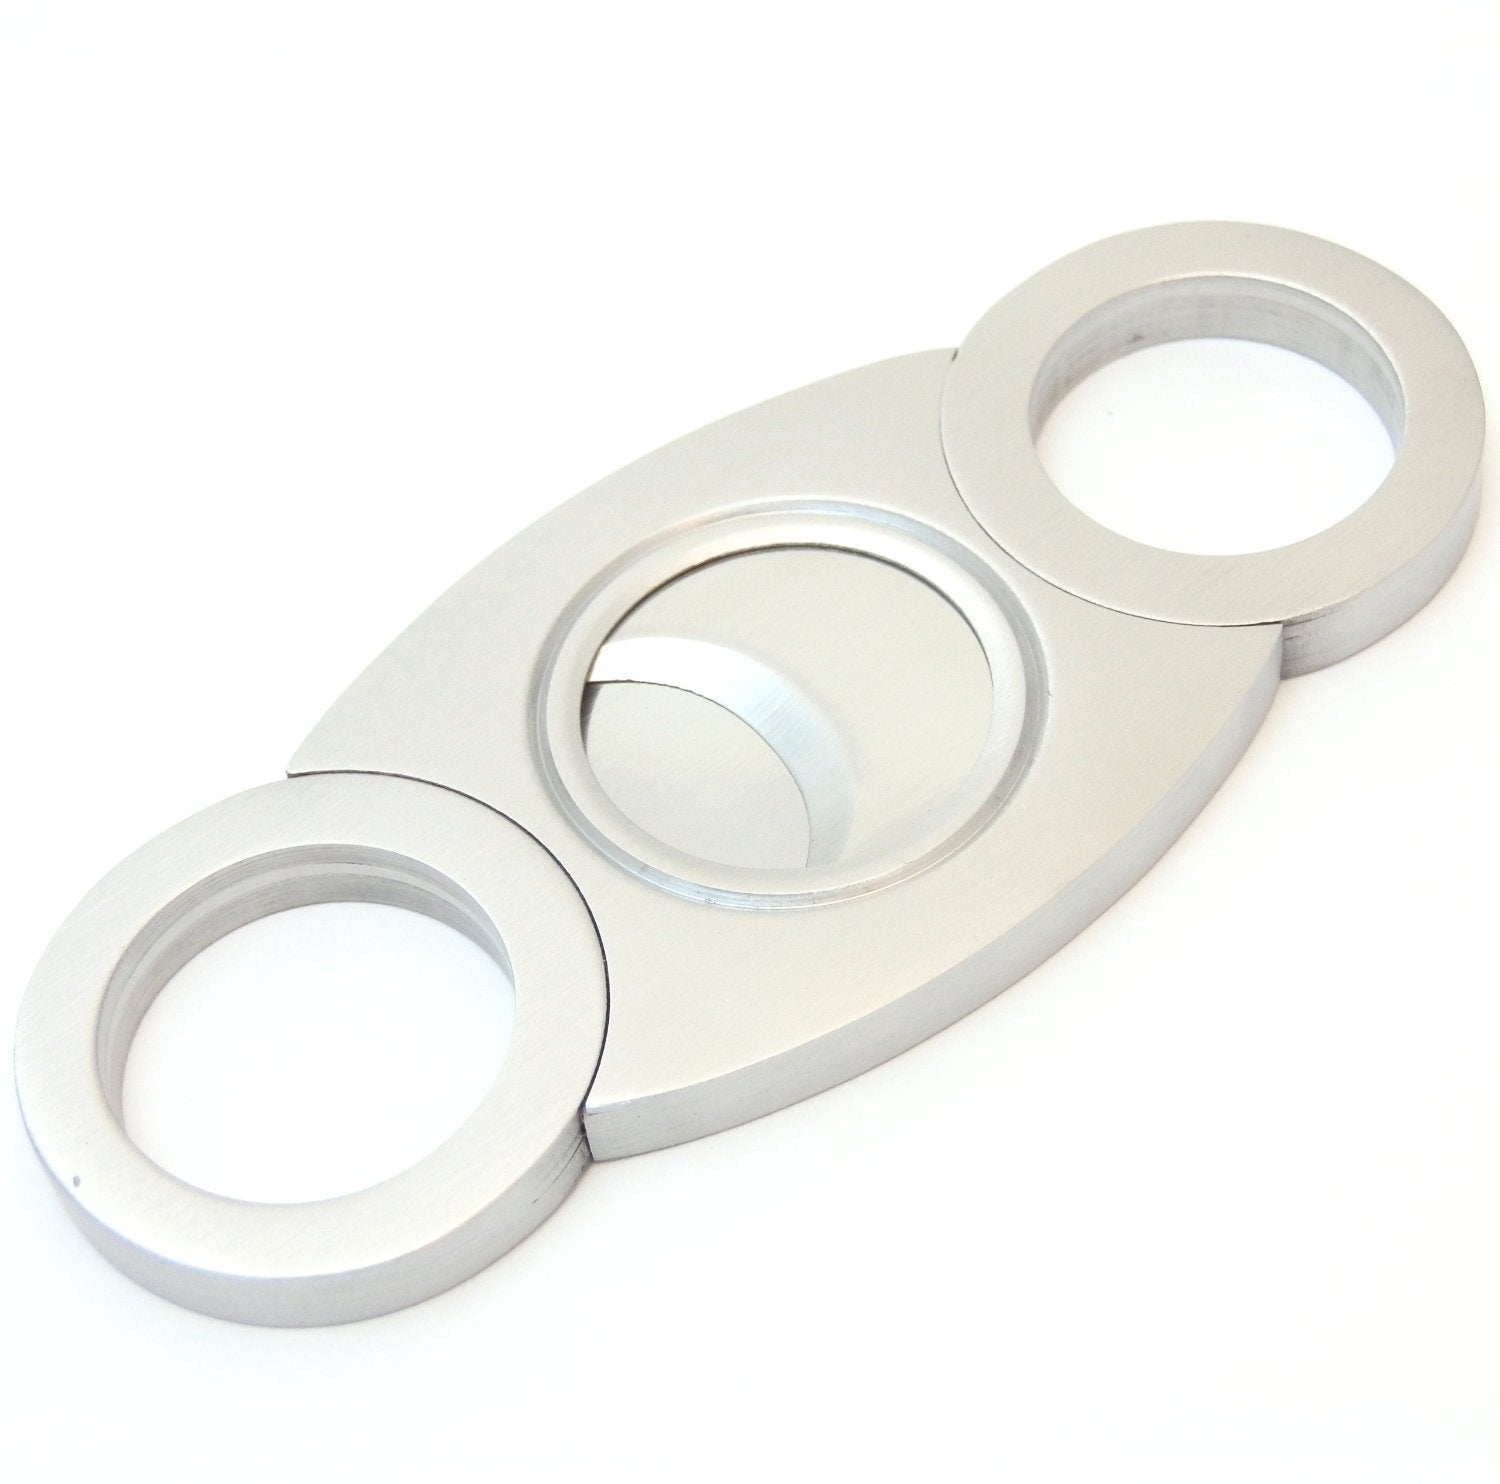 Mrs. Brog Stainless Steel Cigar Cutter With Back Protector - Round Ends - Leather Pouch - Guillotine Double Blade for a Precise Perfect Cut